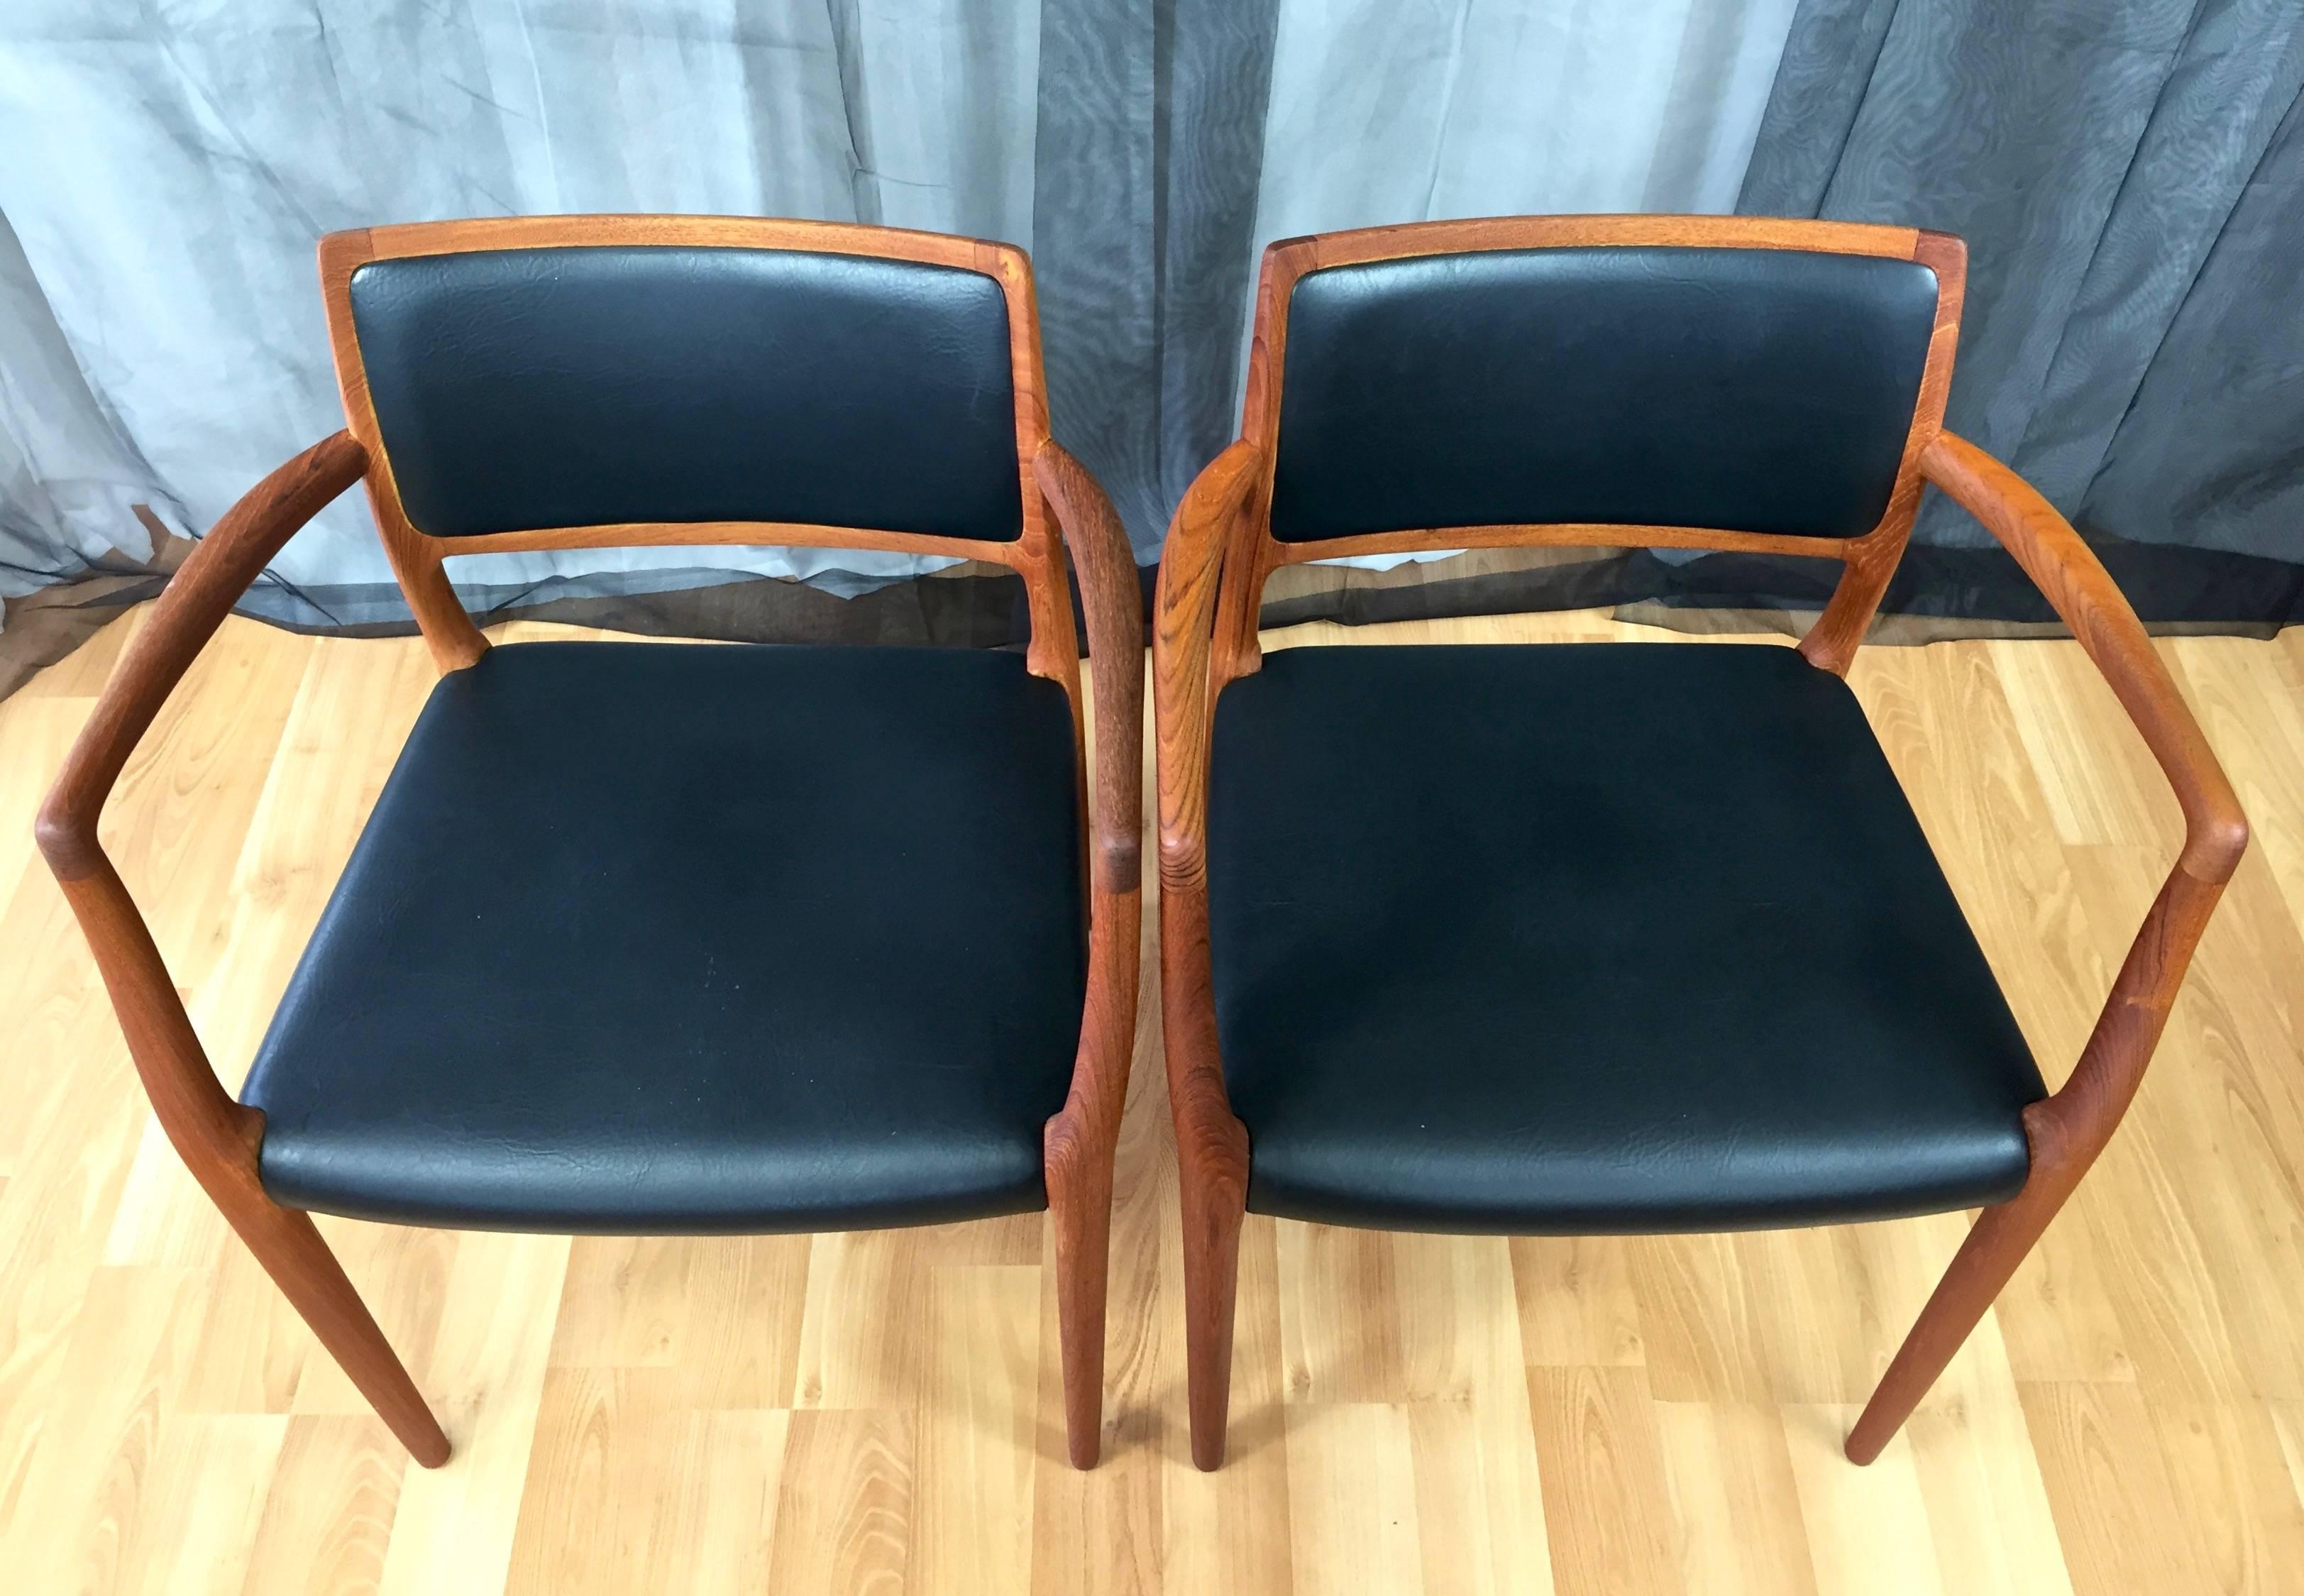 A pair of Danish Modern Niels Møller Model 65 teak and leather dining chairs with arms for J.L. Møllers Møbelfabrik.

Hand-shaped solid teak frame exemplifies Møller’s signature sculptural approach. Very comfortable ample seat and inset back